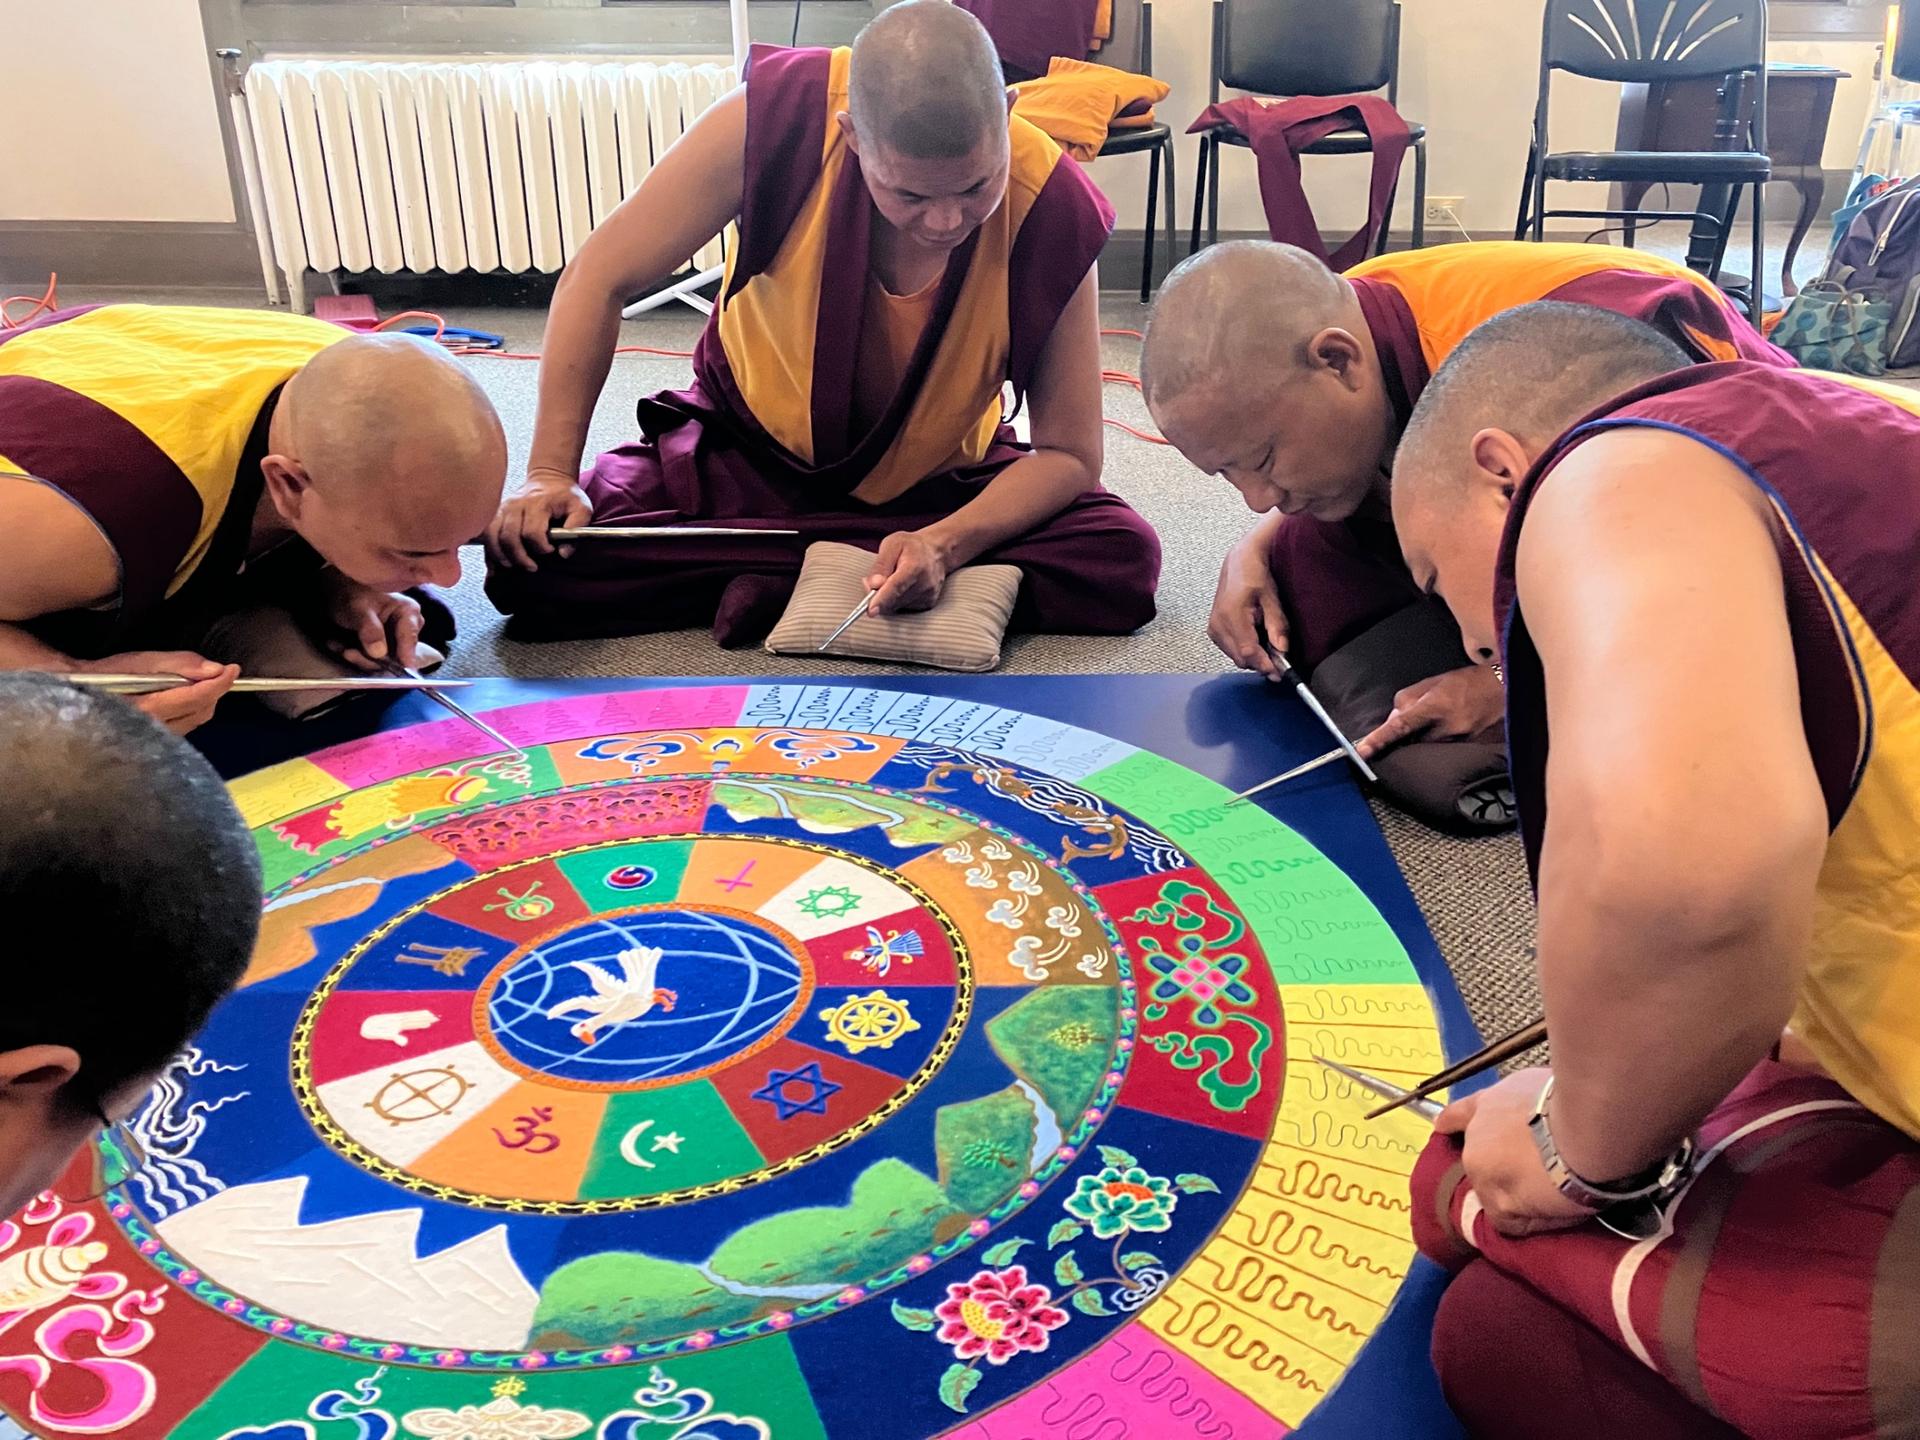 The monks work quickly with focus to make the final touches on the mandala on the last day, when it will then be ceremoniously dissolved.